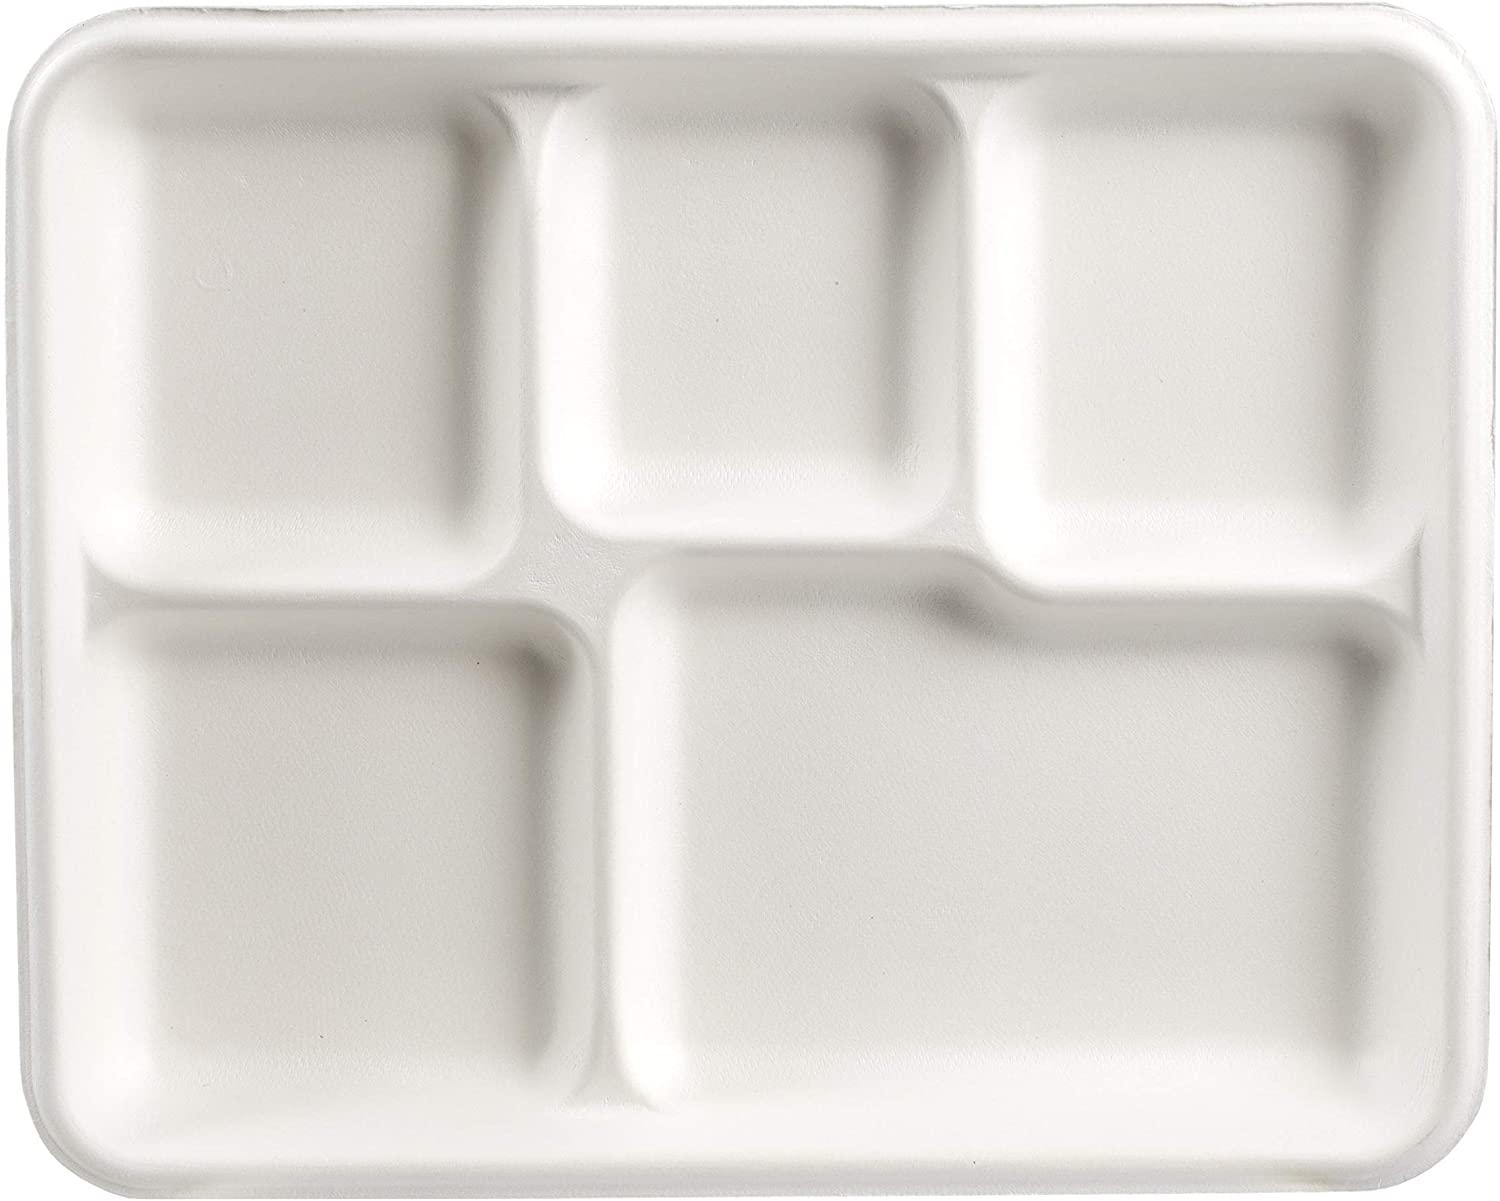 Square Plates - Office Catch